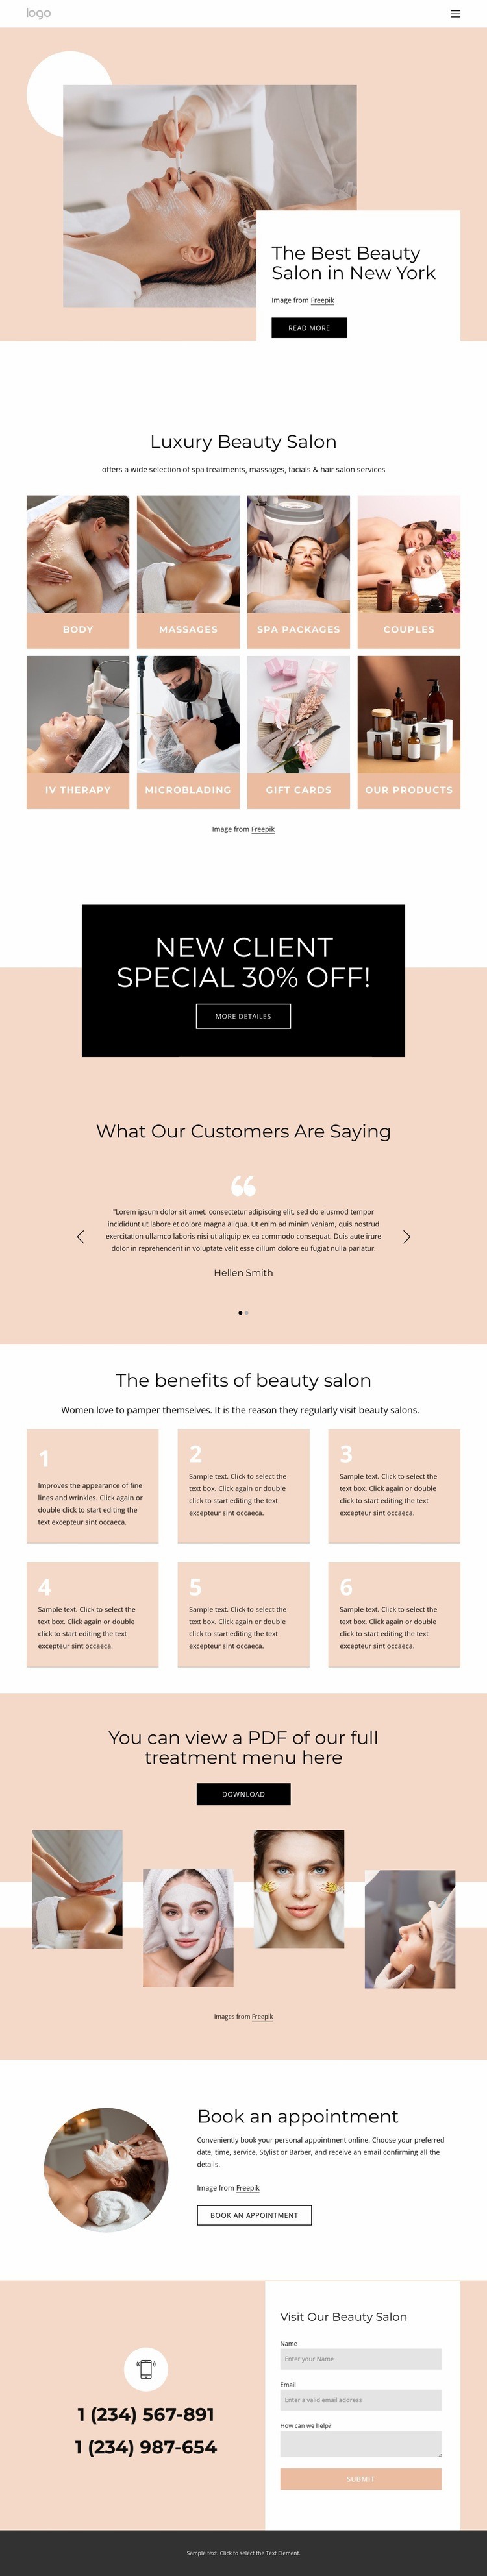 The best beauty salon in NYC Homepage Design